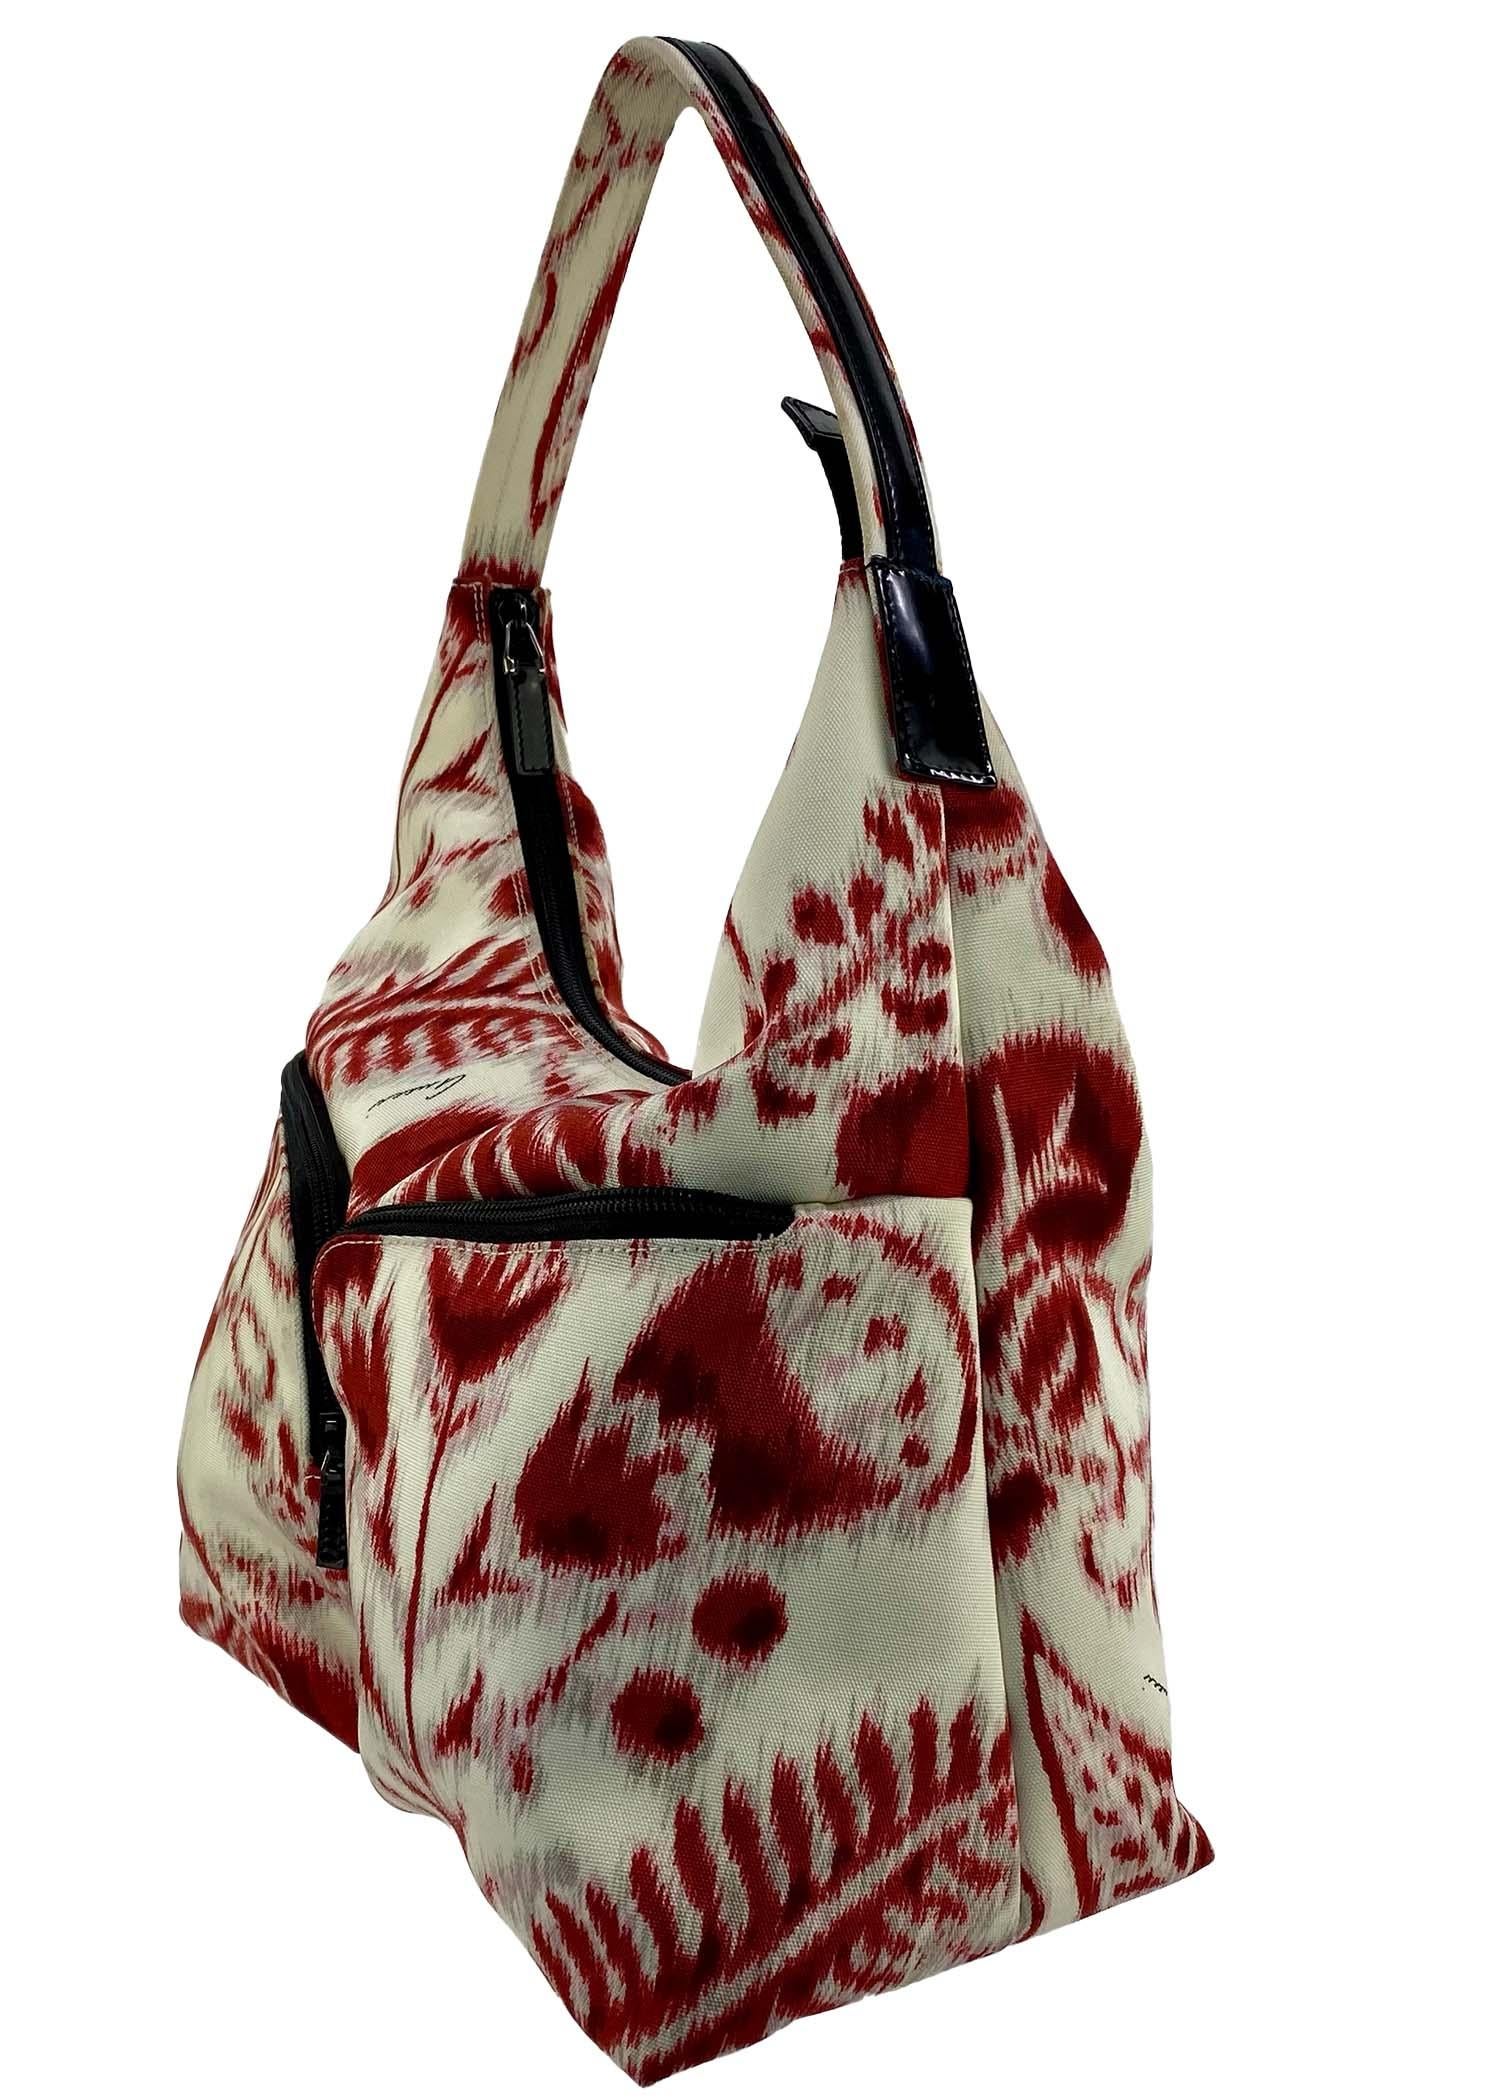 S/S 2000 Gucci by Tom Ford 'Havana' Print Red and White Hobo In Good Condition In West Hollywood, CA